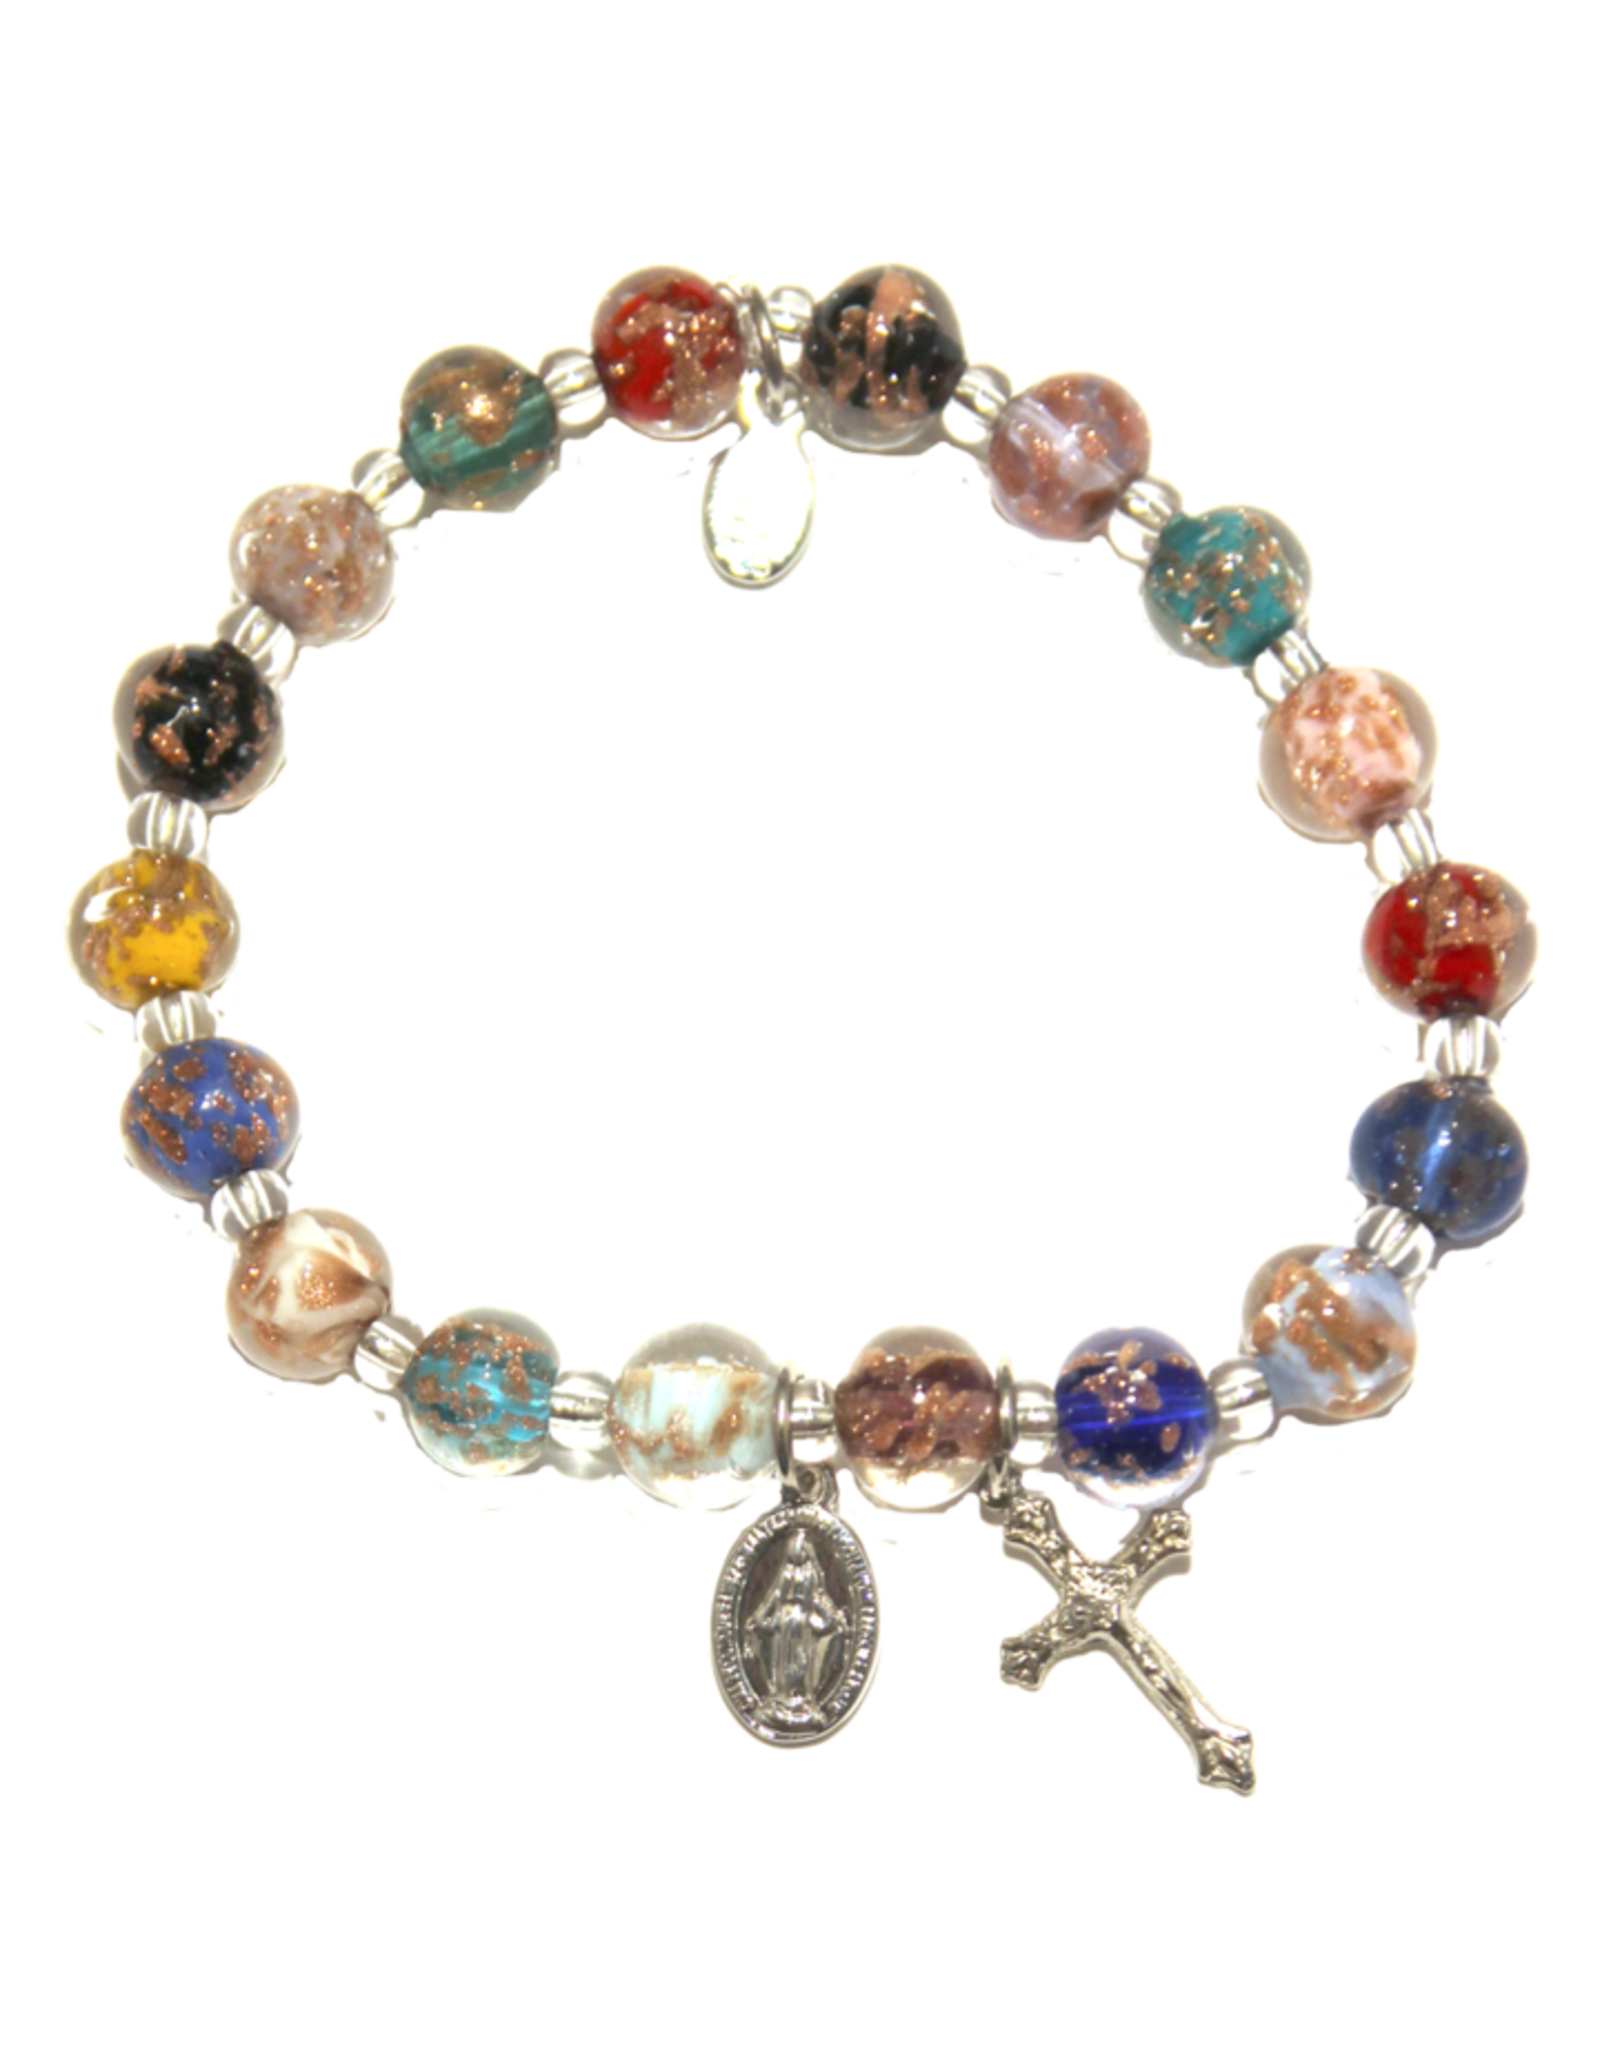 Rosary Bracelet - Multi Color Genuine Murano SIlver Tone Stretch Bracelet with Sommerso Beads, Miraculous Medal & Crucifix